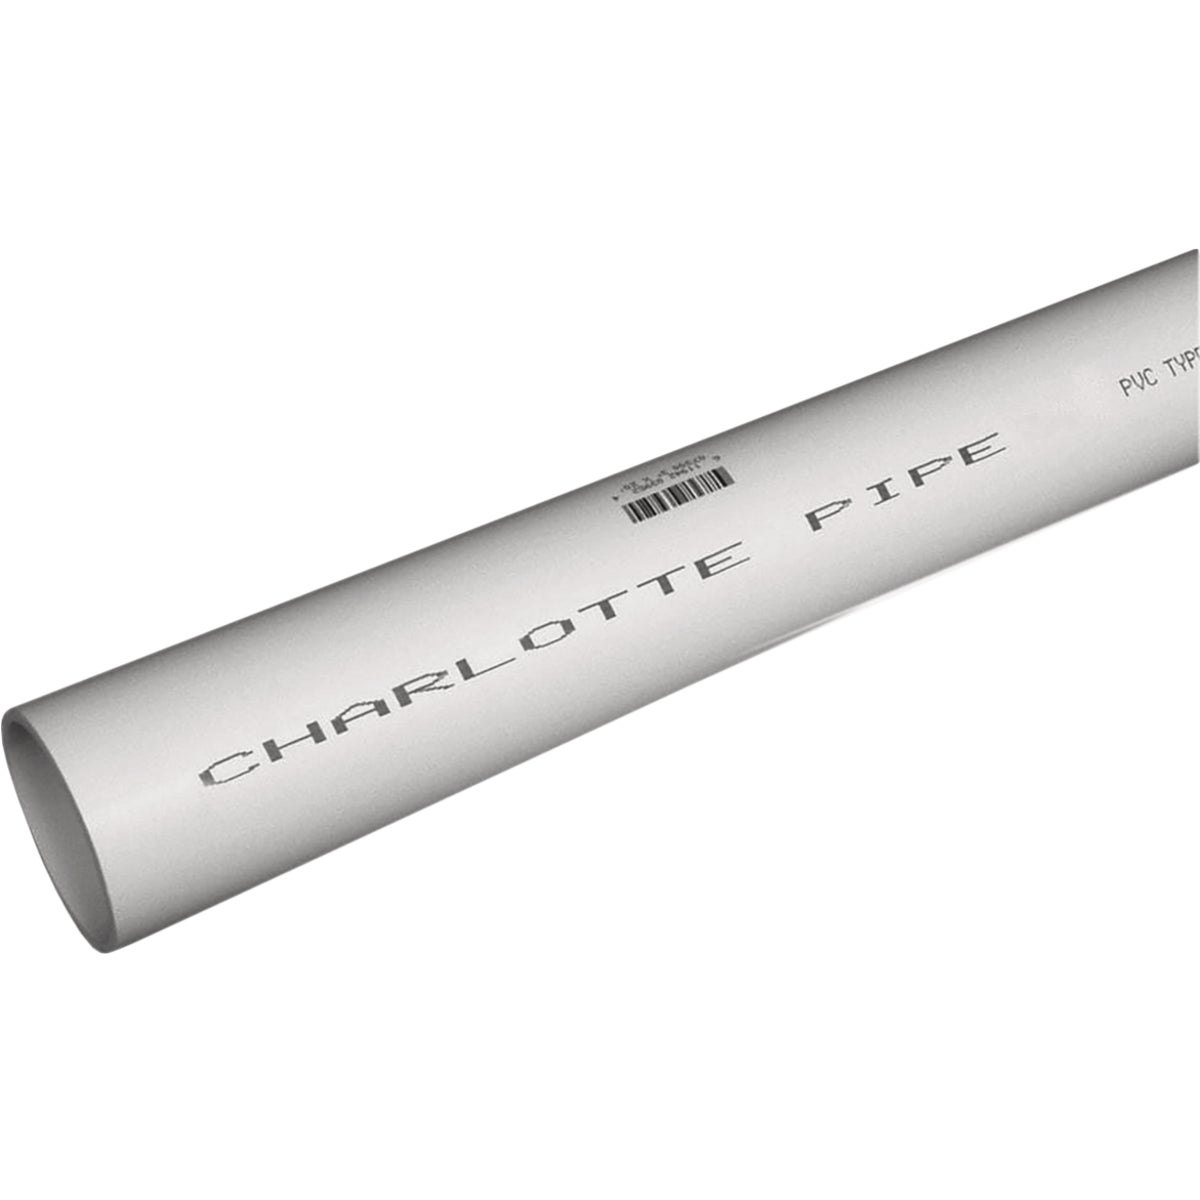 Charlotte Pipe 3/4 In. x 2 Ft. Schedule 40 PVC Pressure Pipe, Plain End